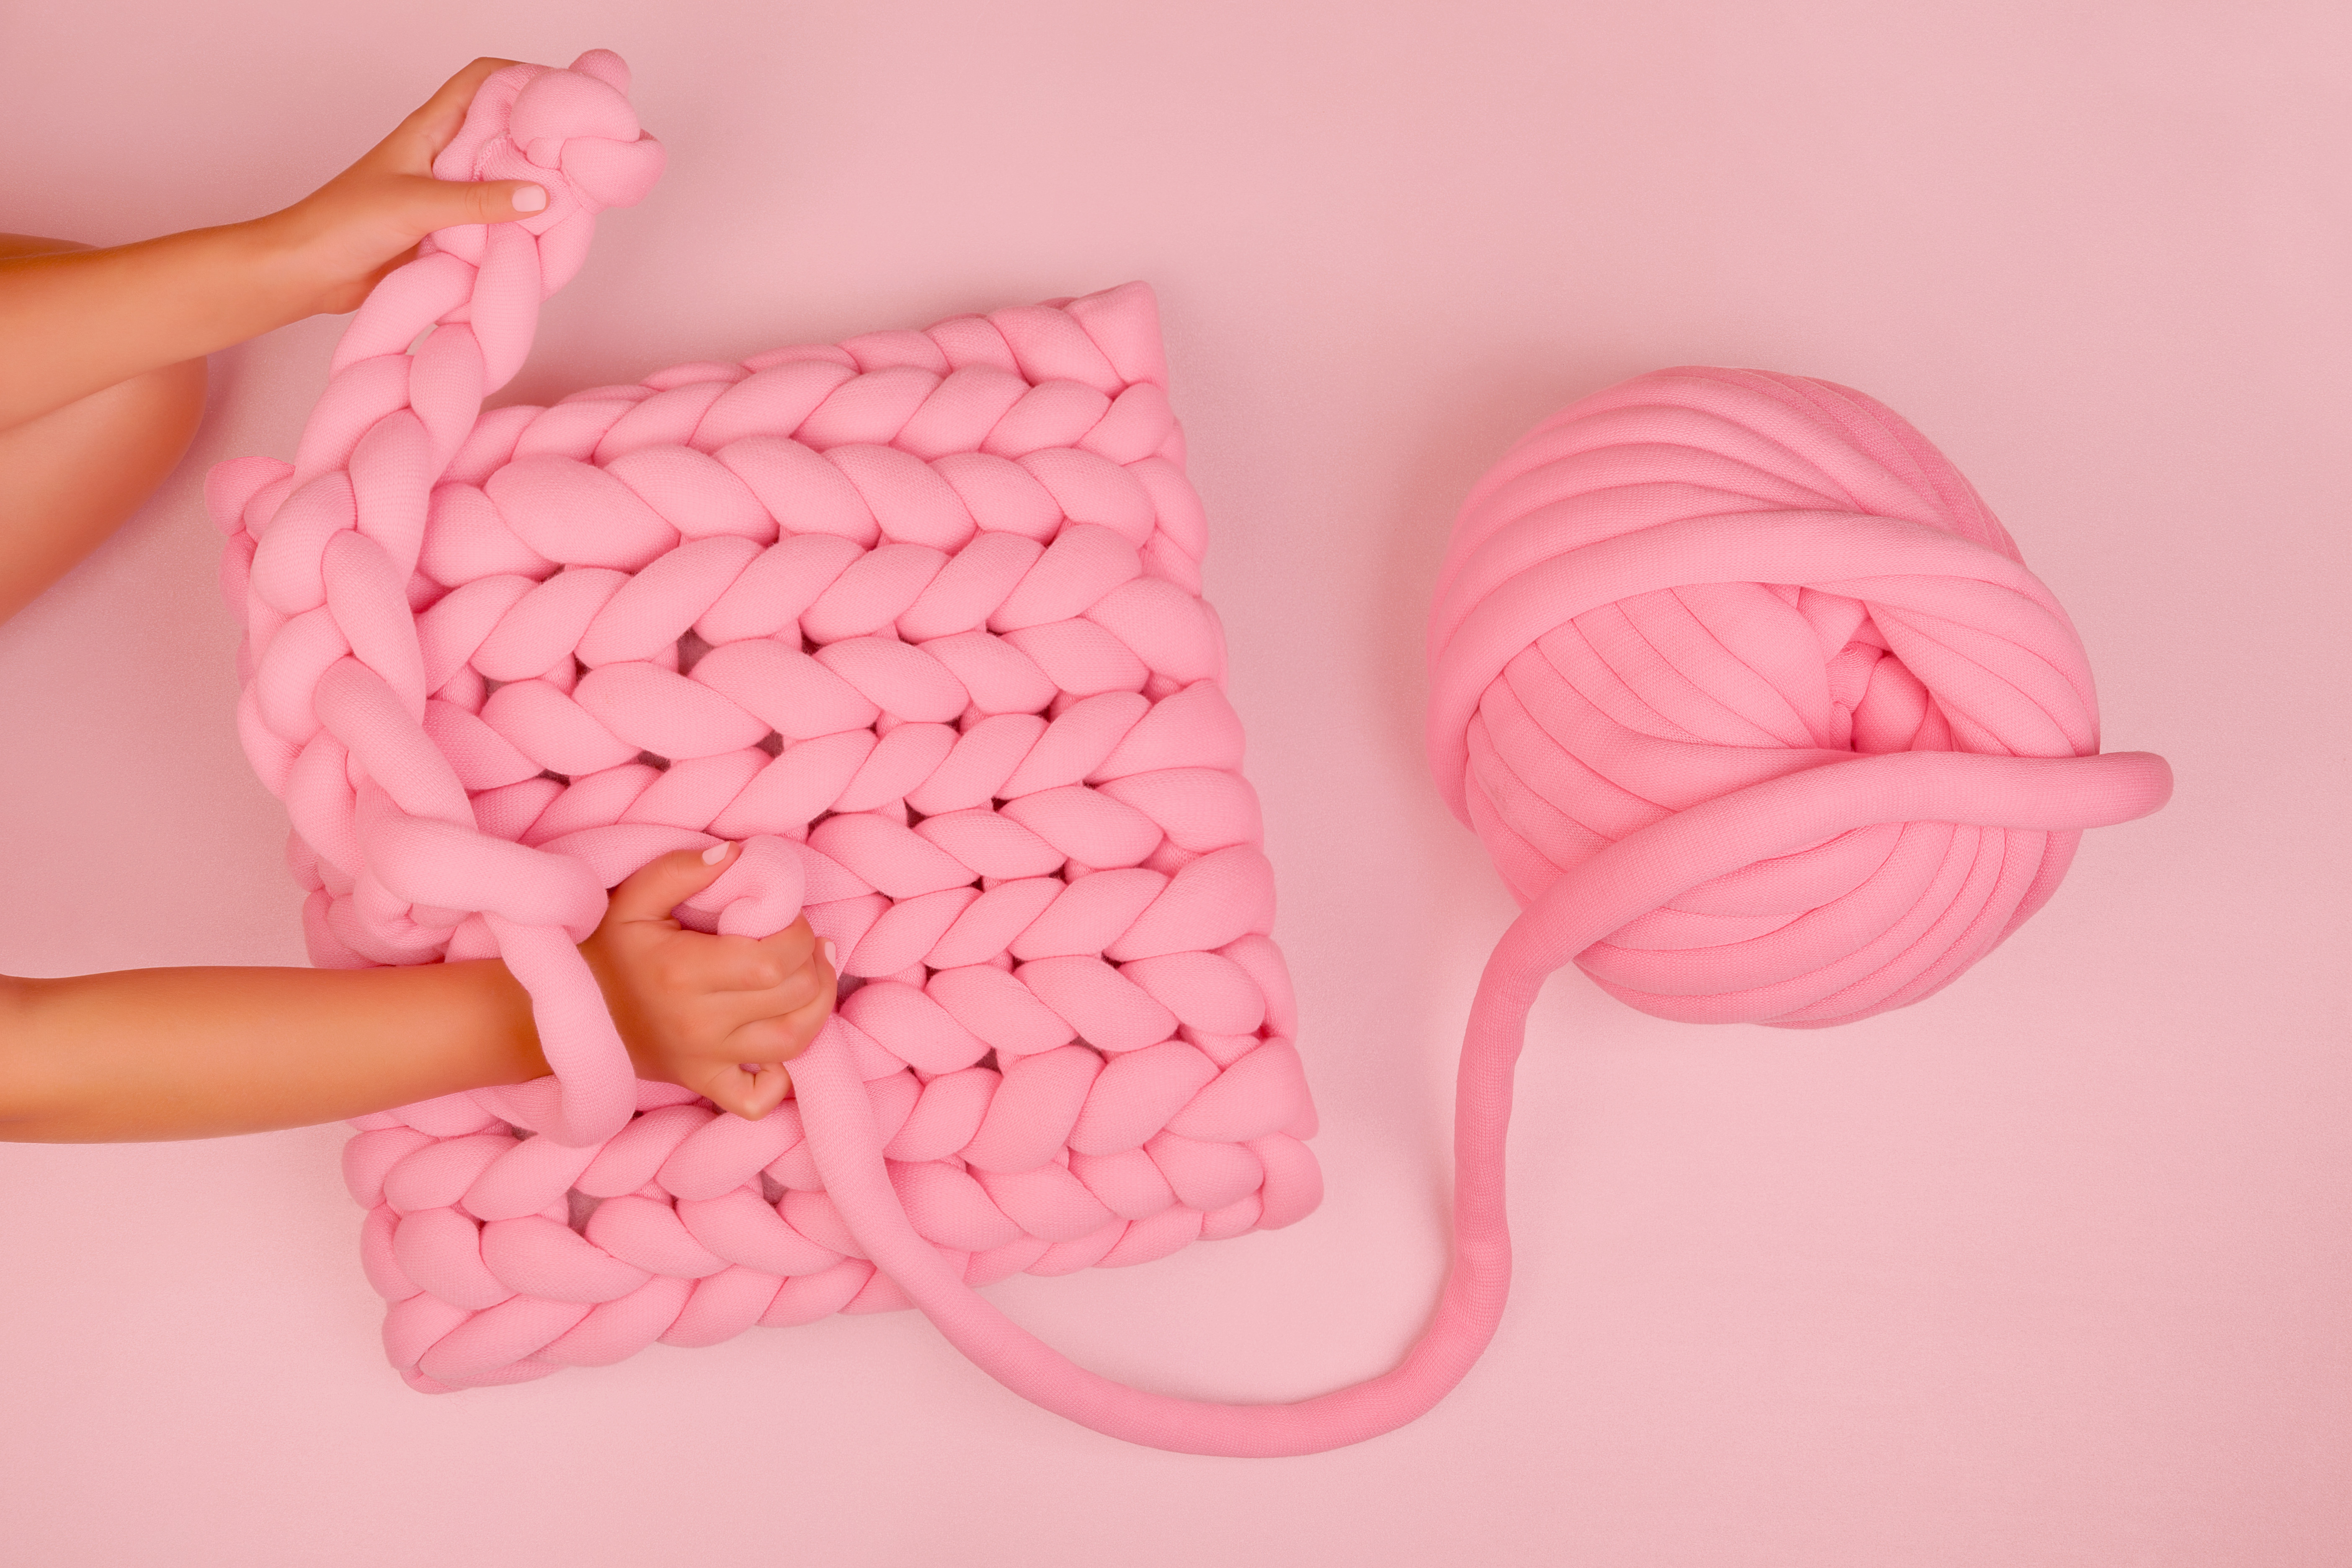 Girl knitting adorable super chunky pillow. Minimalistic pink background. Craft, handmade and skill.